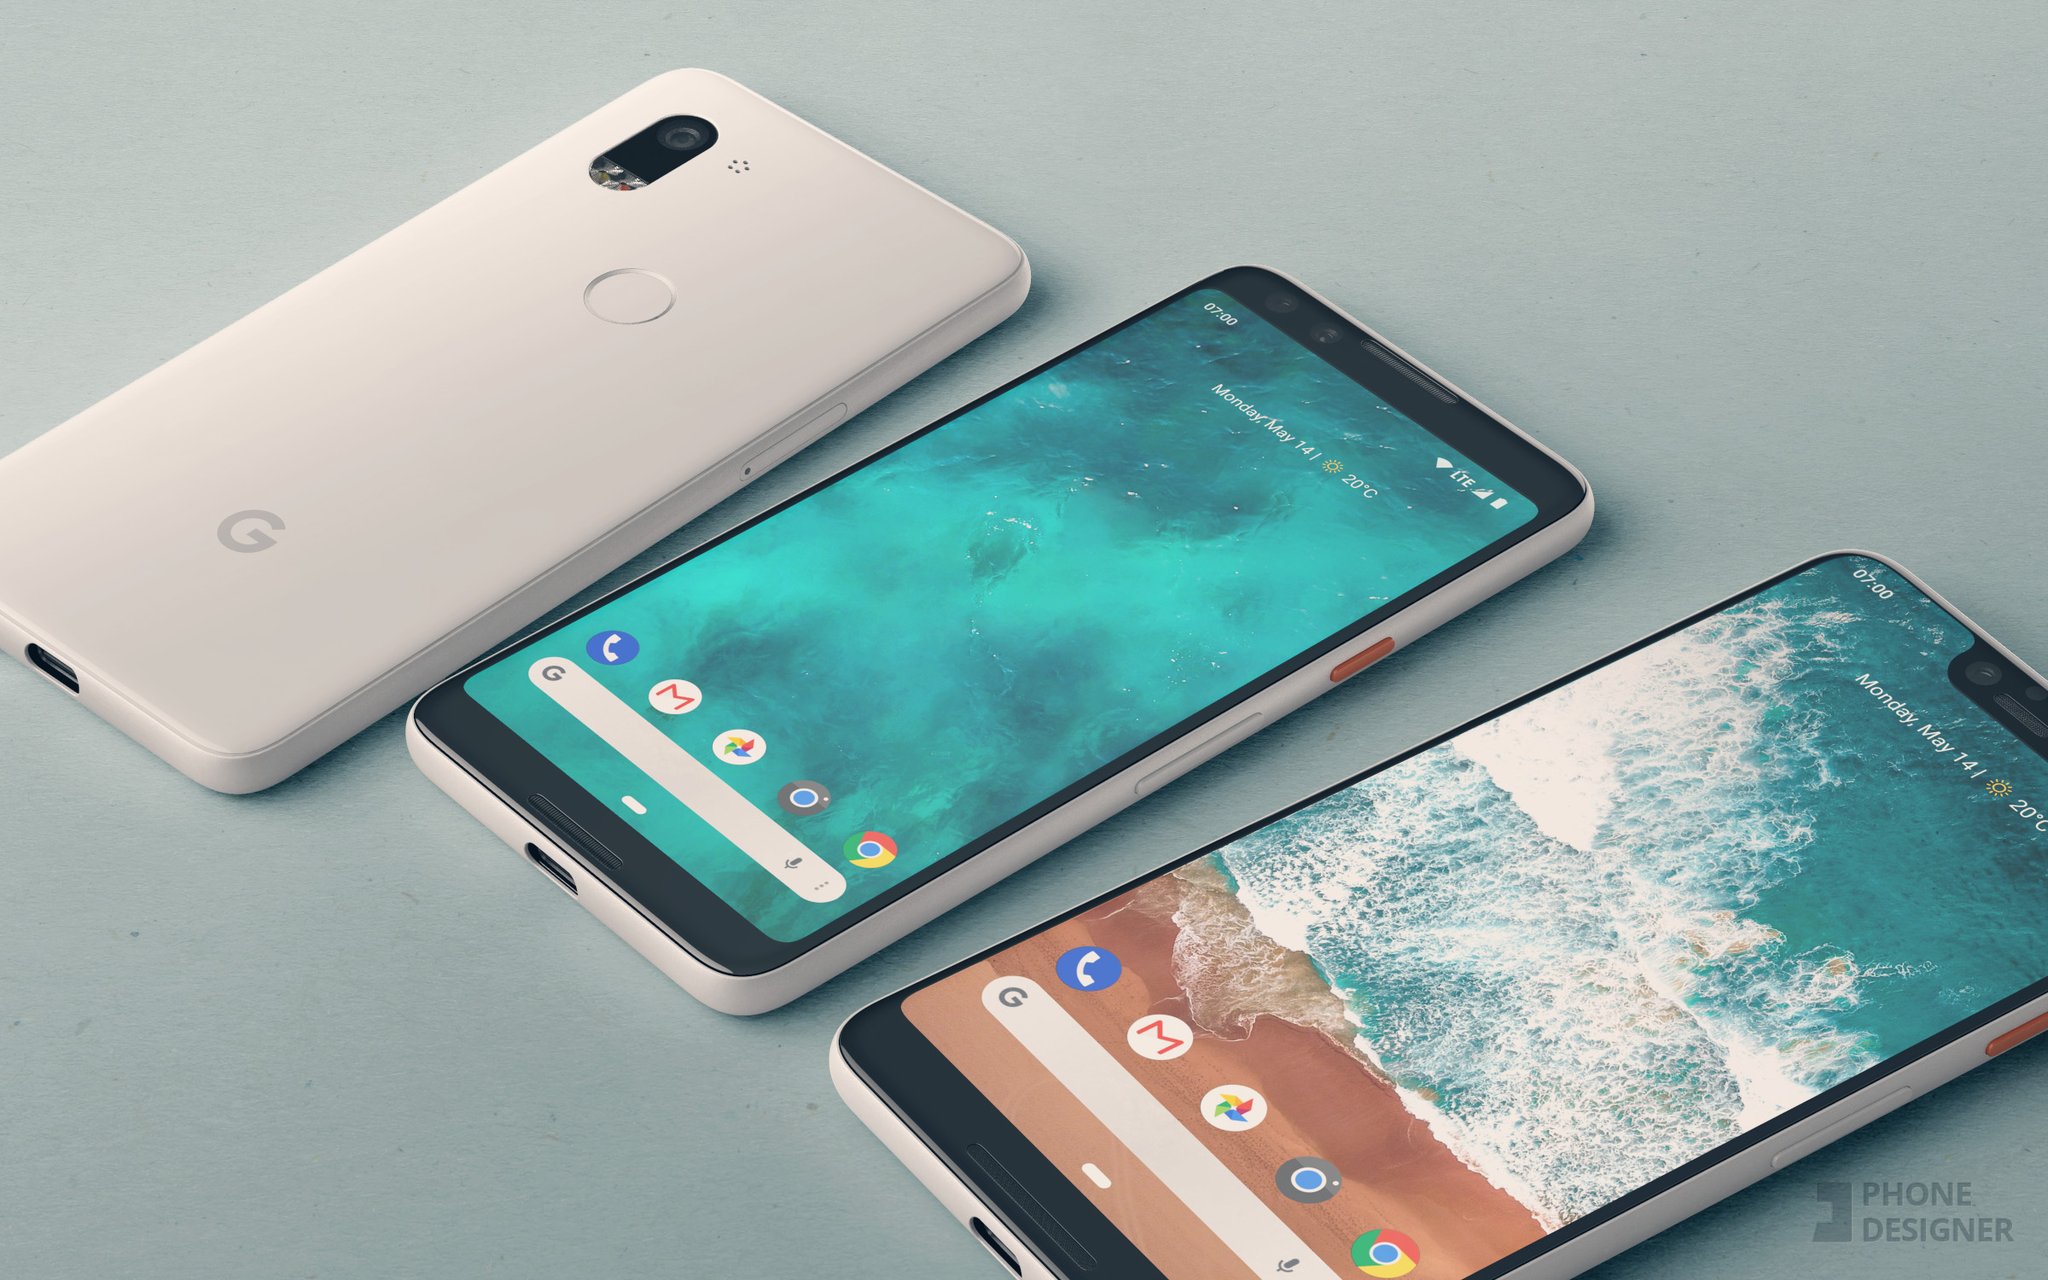 Pixel 3 Phones to Be built By Foxconn and Have Two Front Cameras